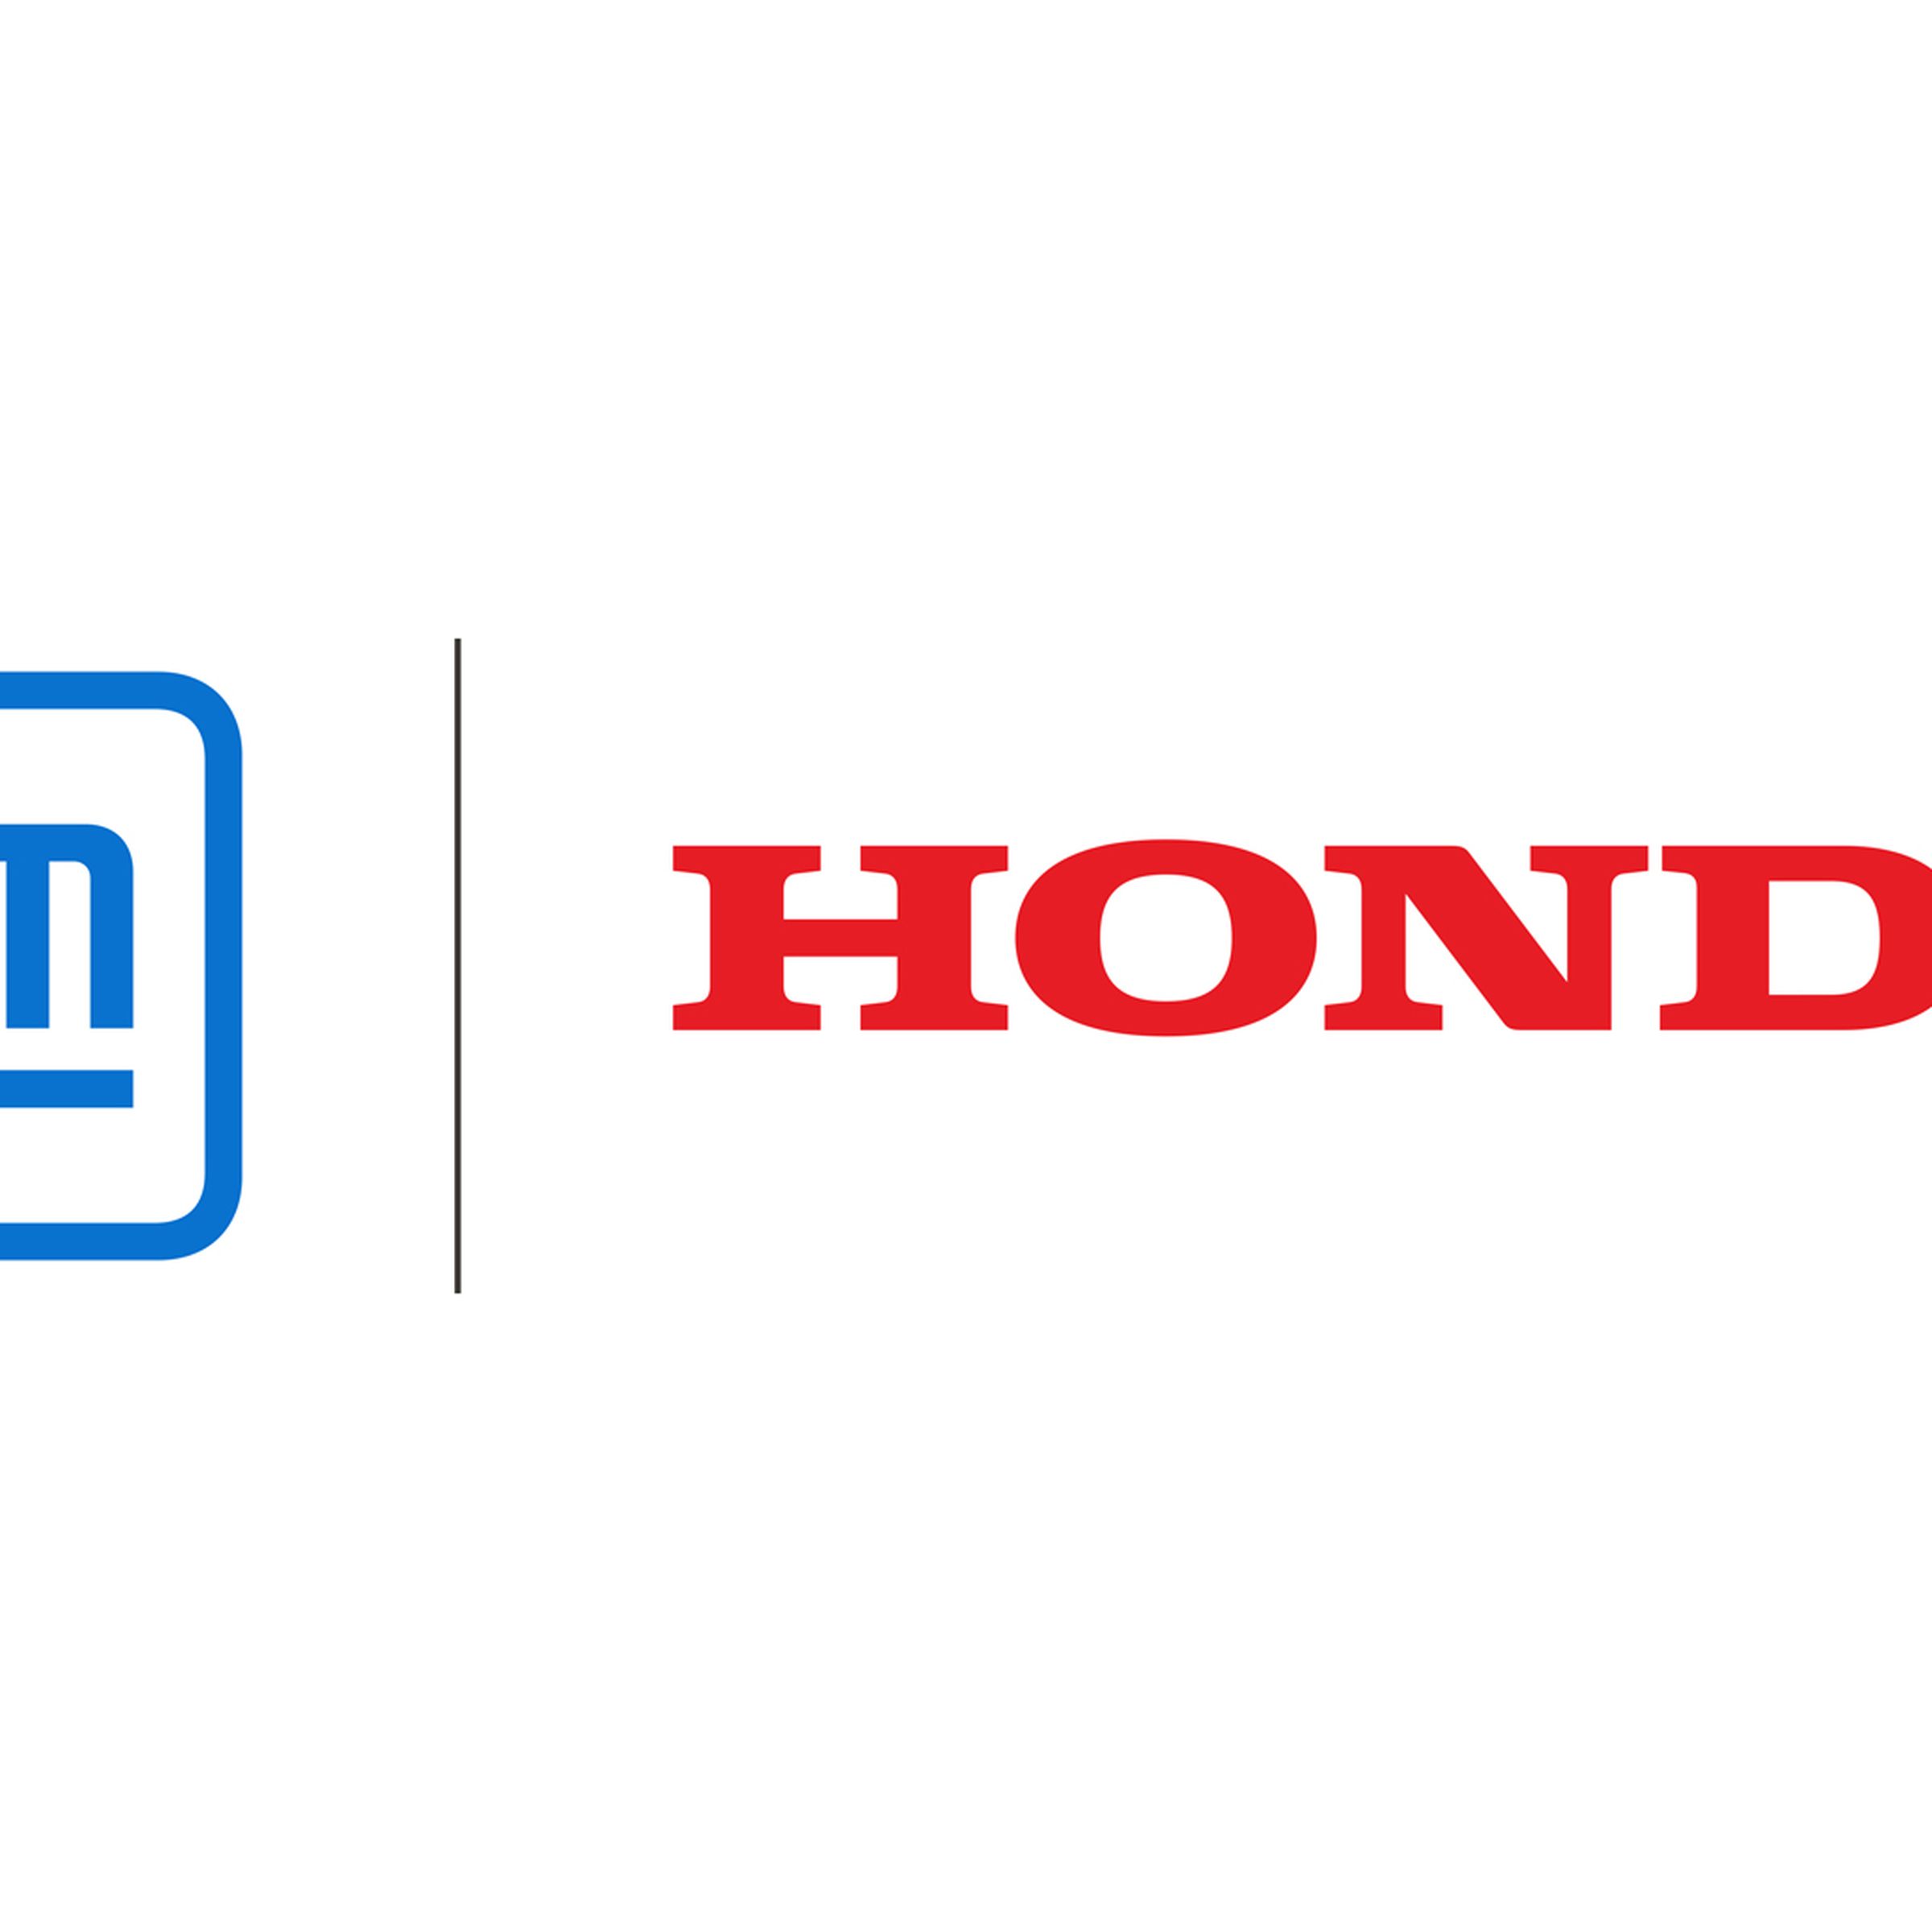 GM and Honda logos side by side